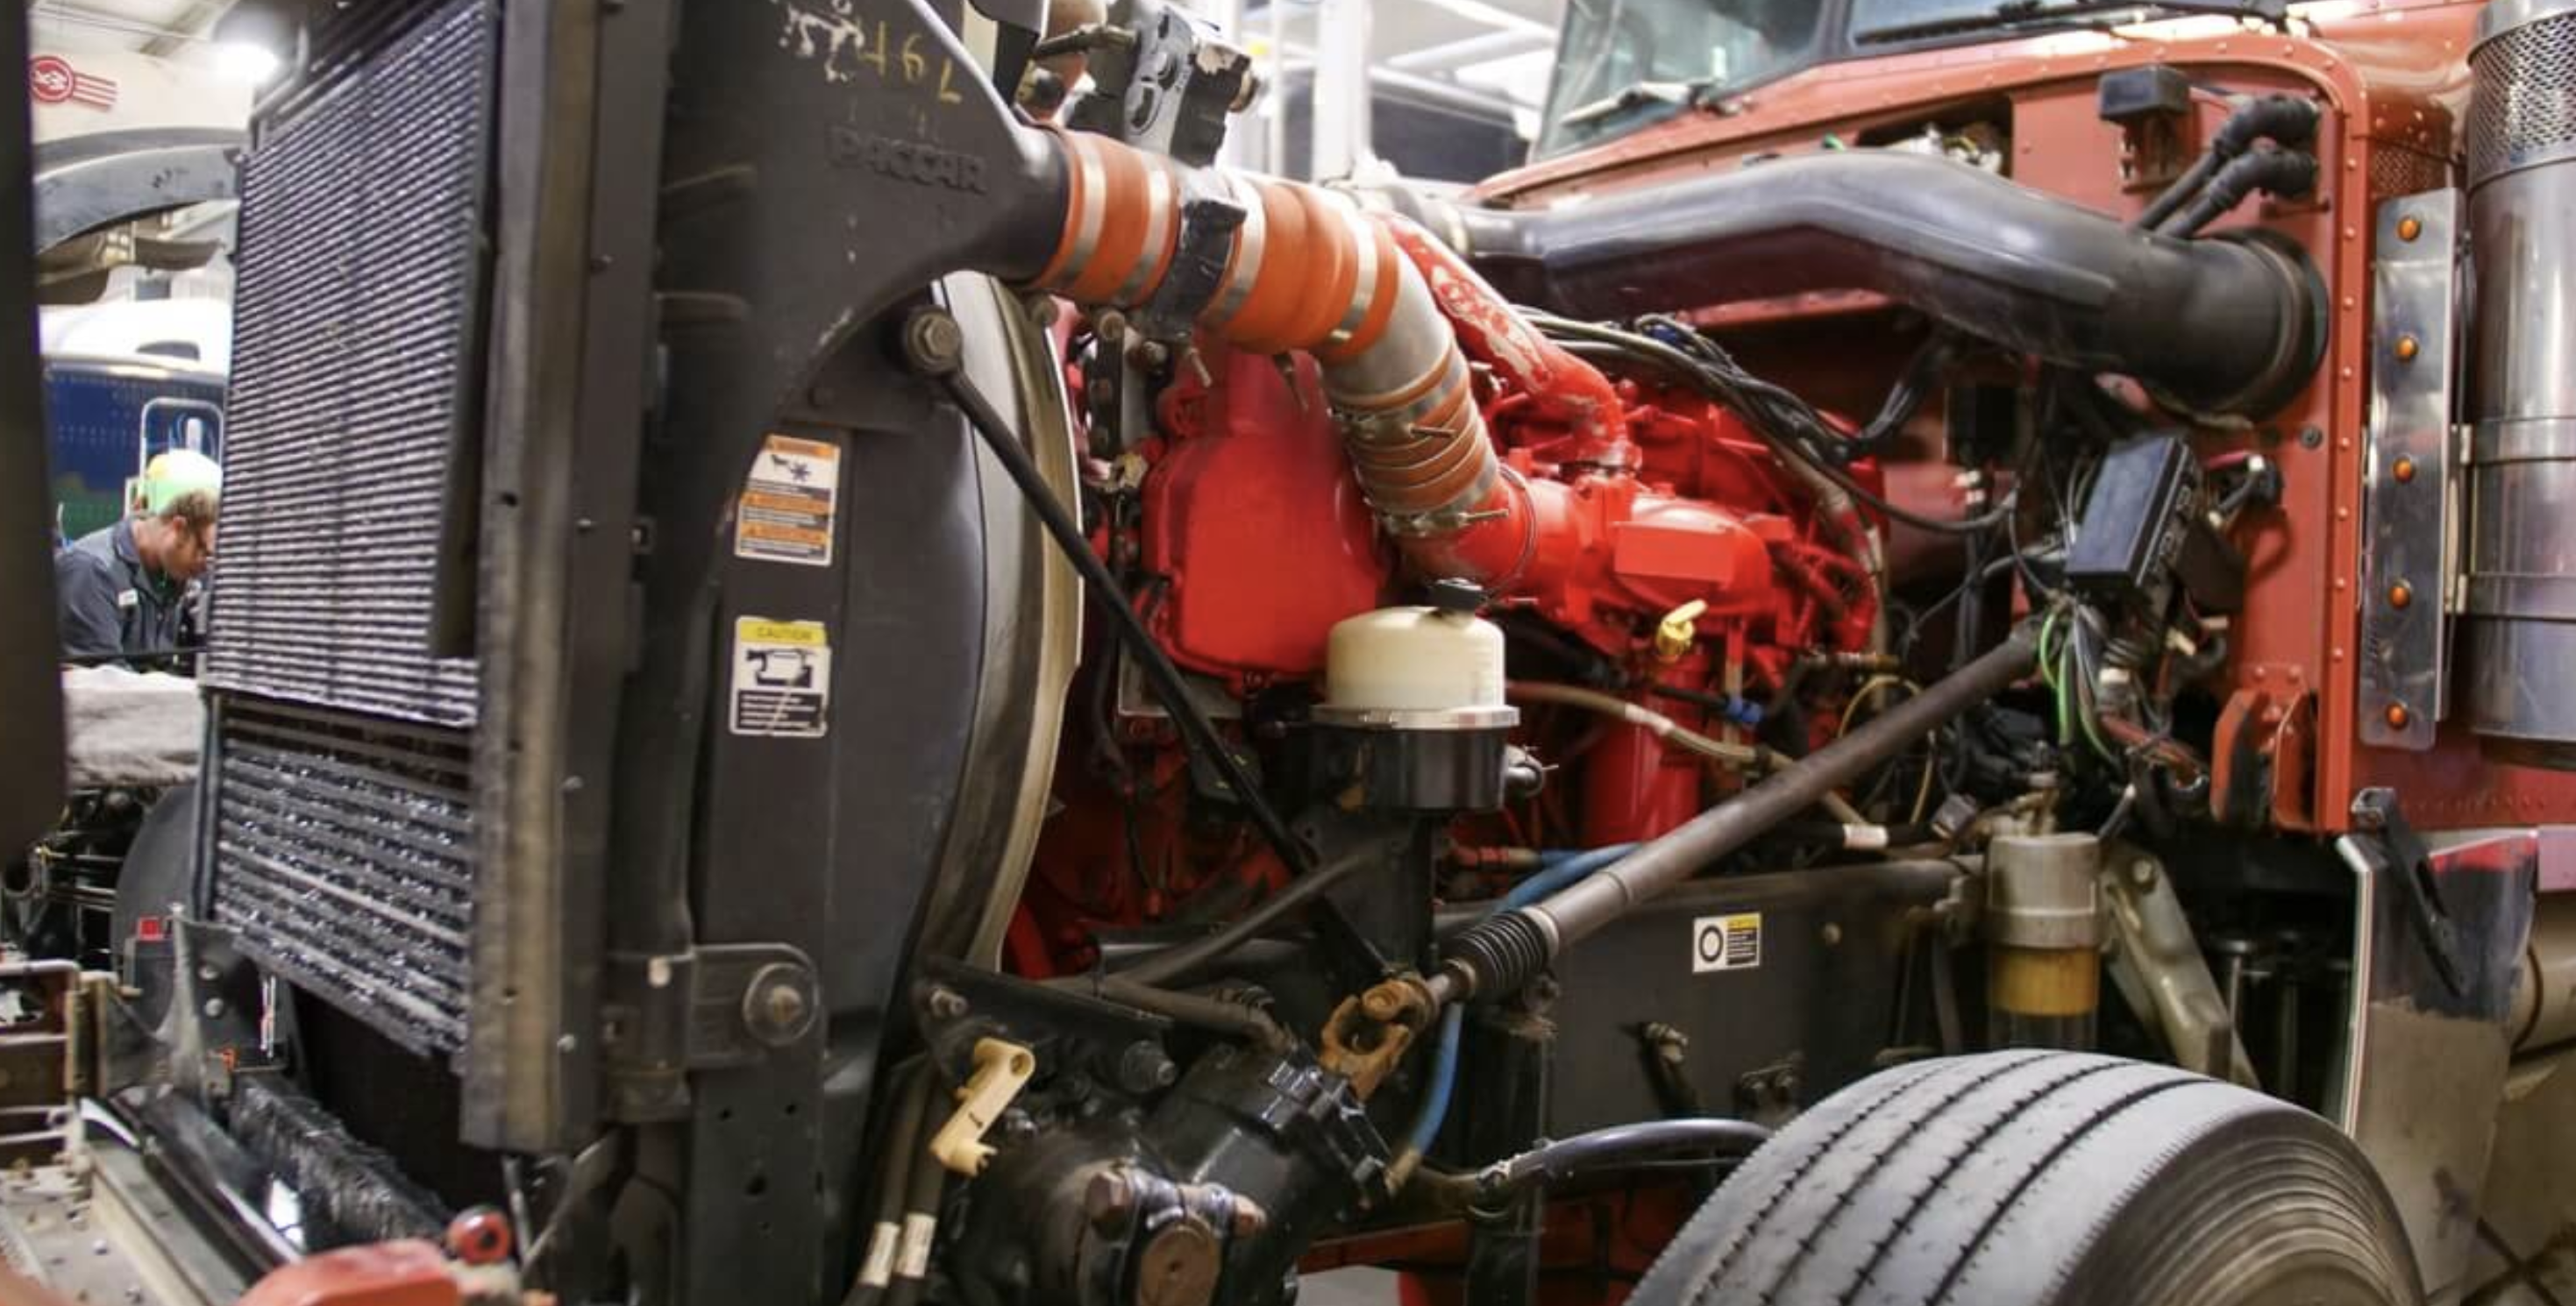 this image shows truck engine repair in Pittsburgh, PA